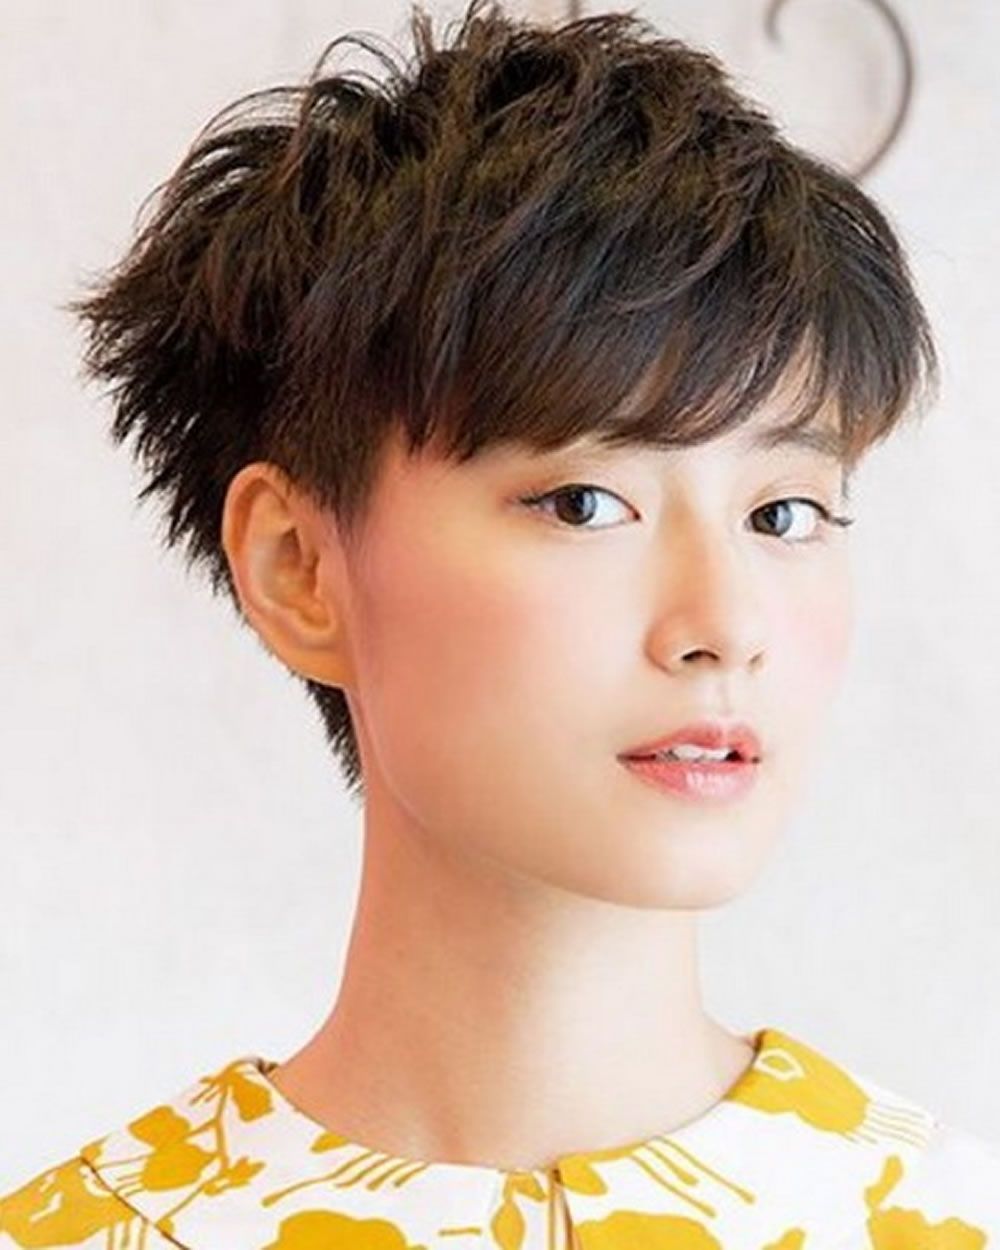 Pixie Haircuts For Asian Women | 18 Best Short Hairstyle Ideas Throughout Latest Short Bangs Pixie Hairstyles (View 10 of 15)